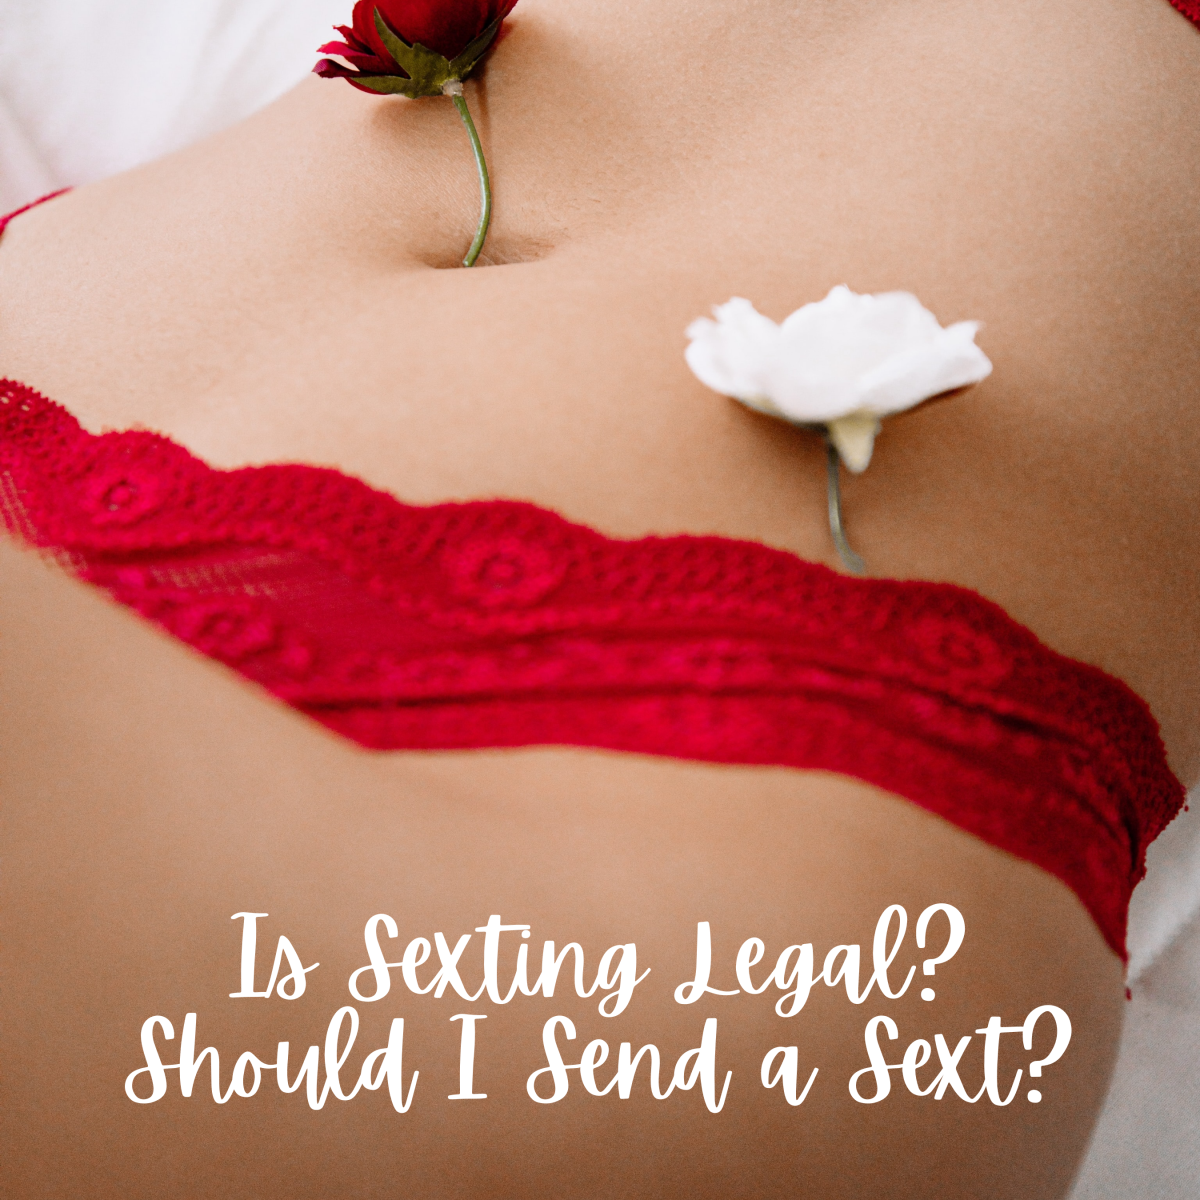 Is Sexting Legal and Could You Get in Trouble for Sending a Sext?